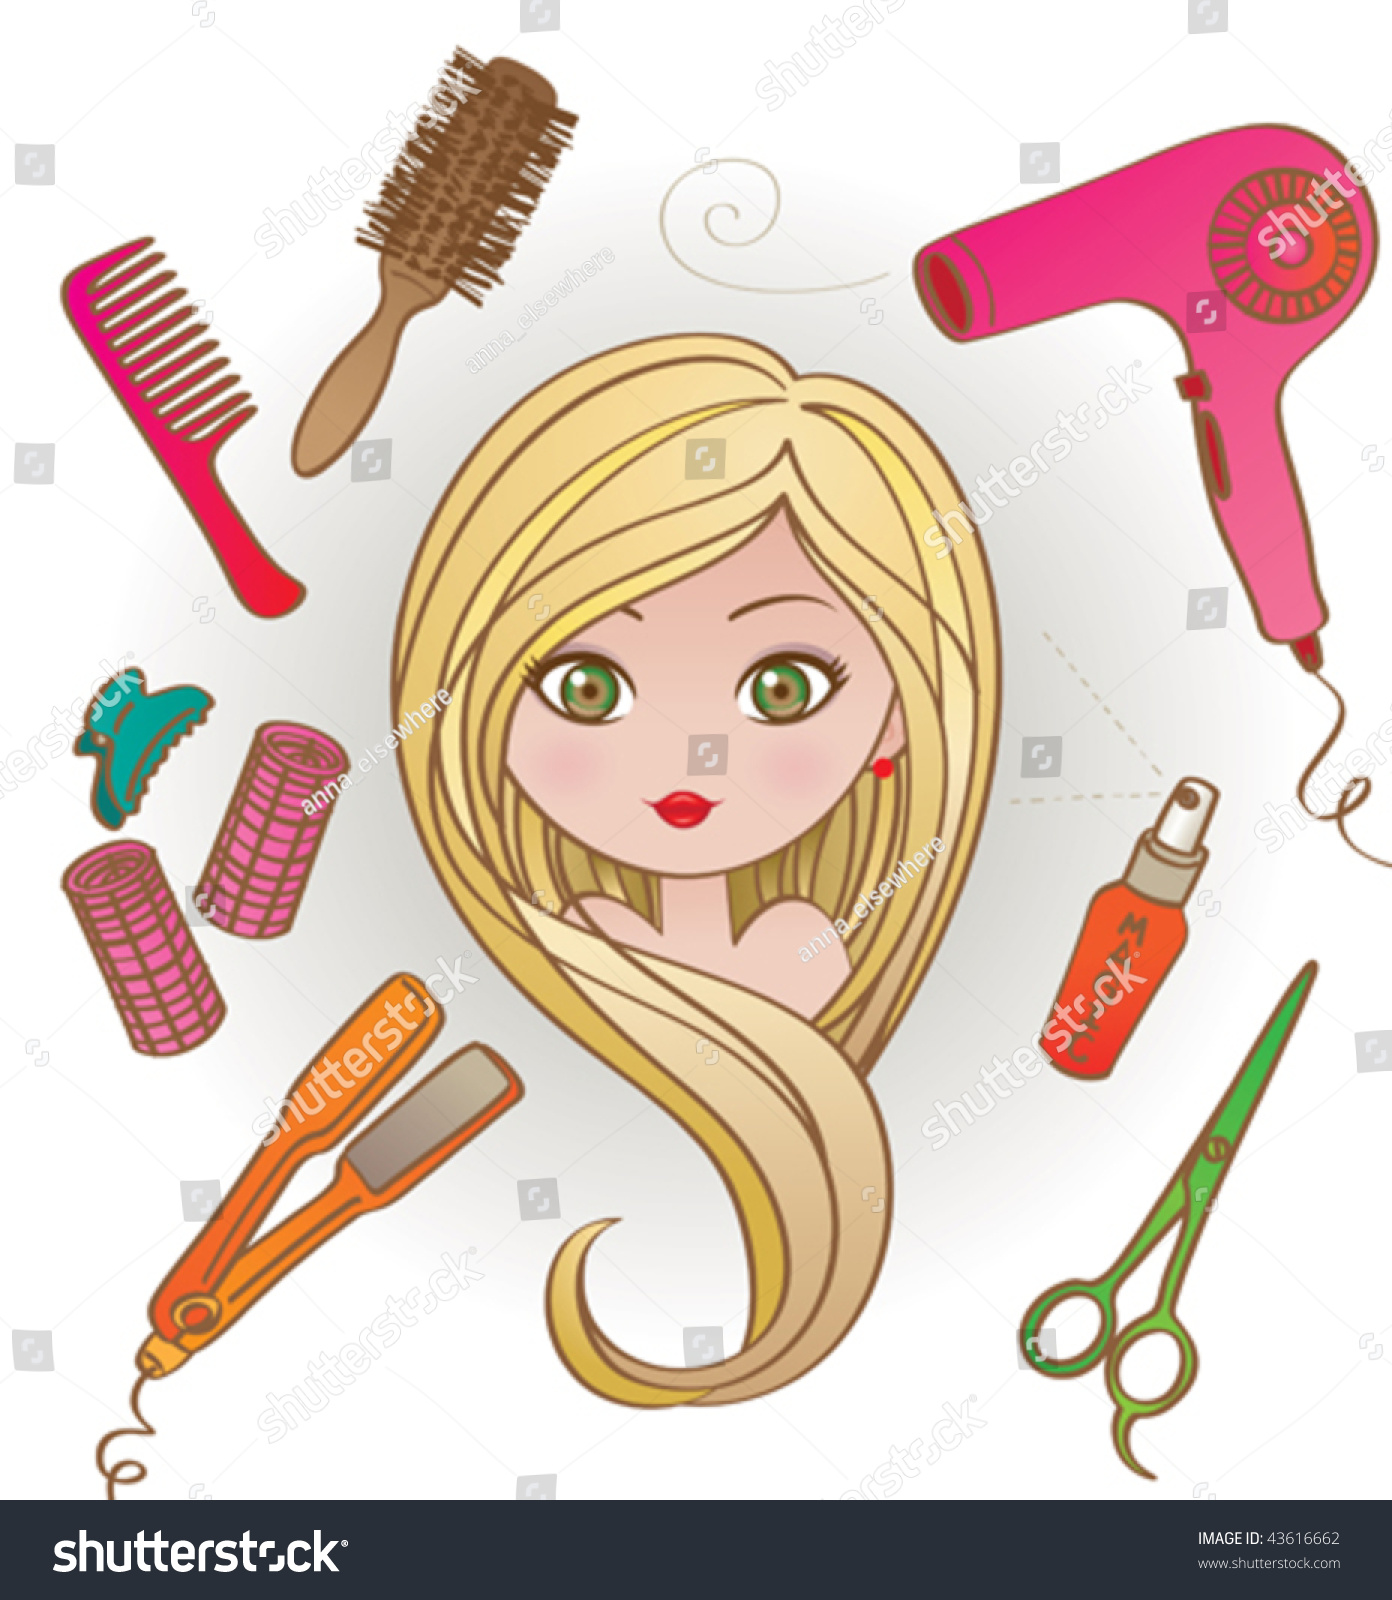 Girl In Hairdresser Salon. Vector Illustration Of A Pretty Girl In A